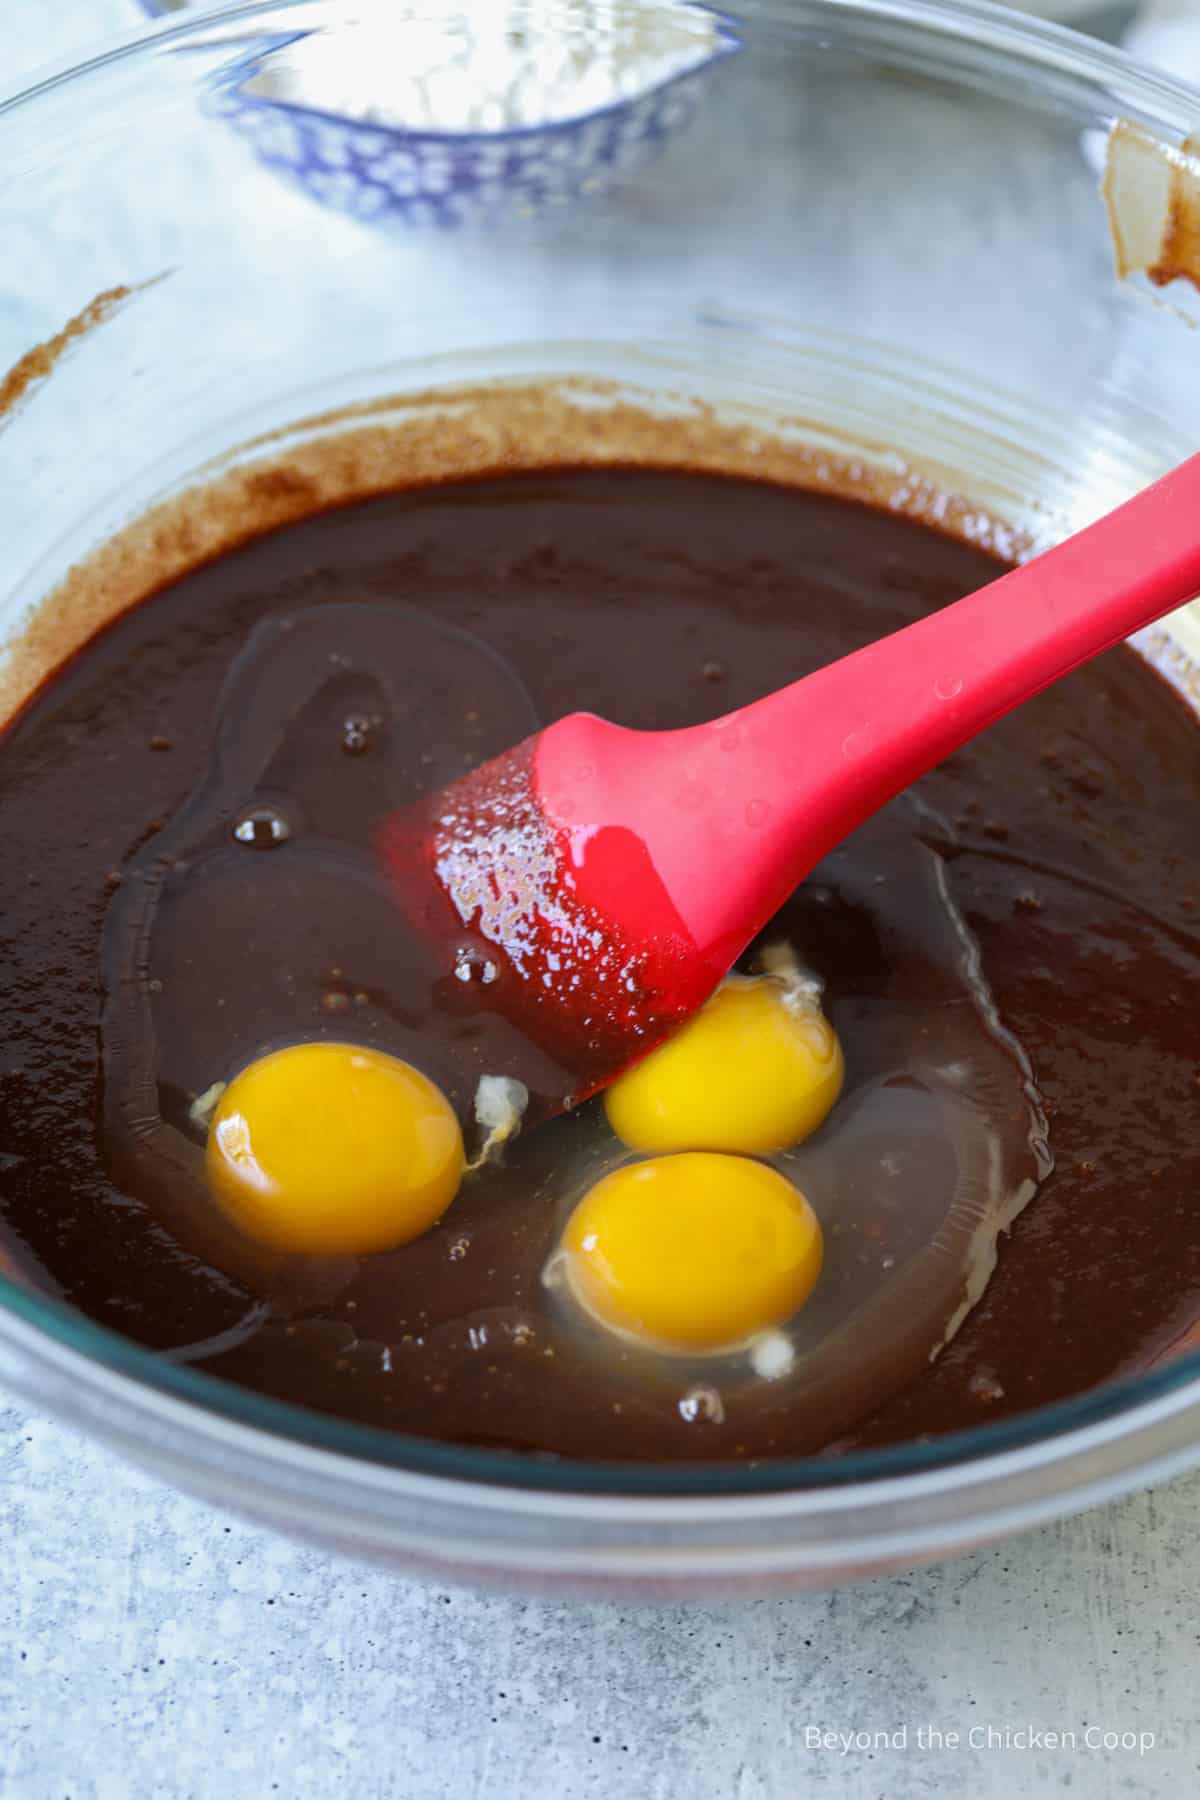 Eggs added to melted chocolate.